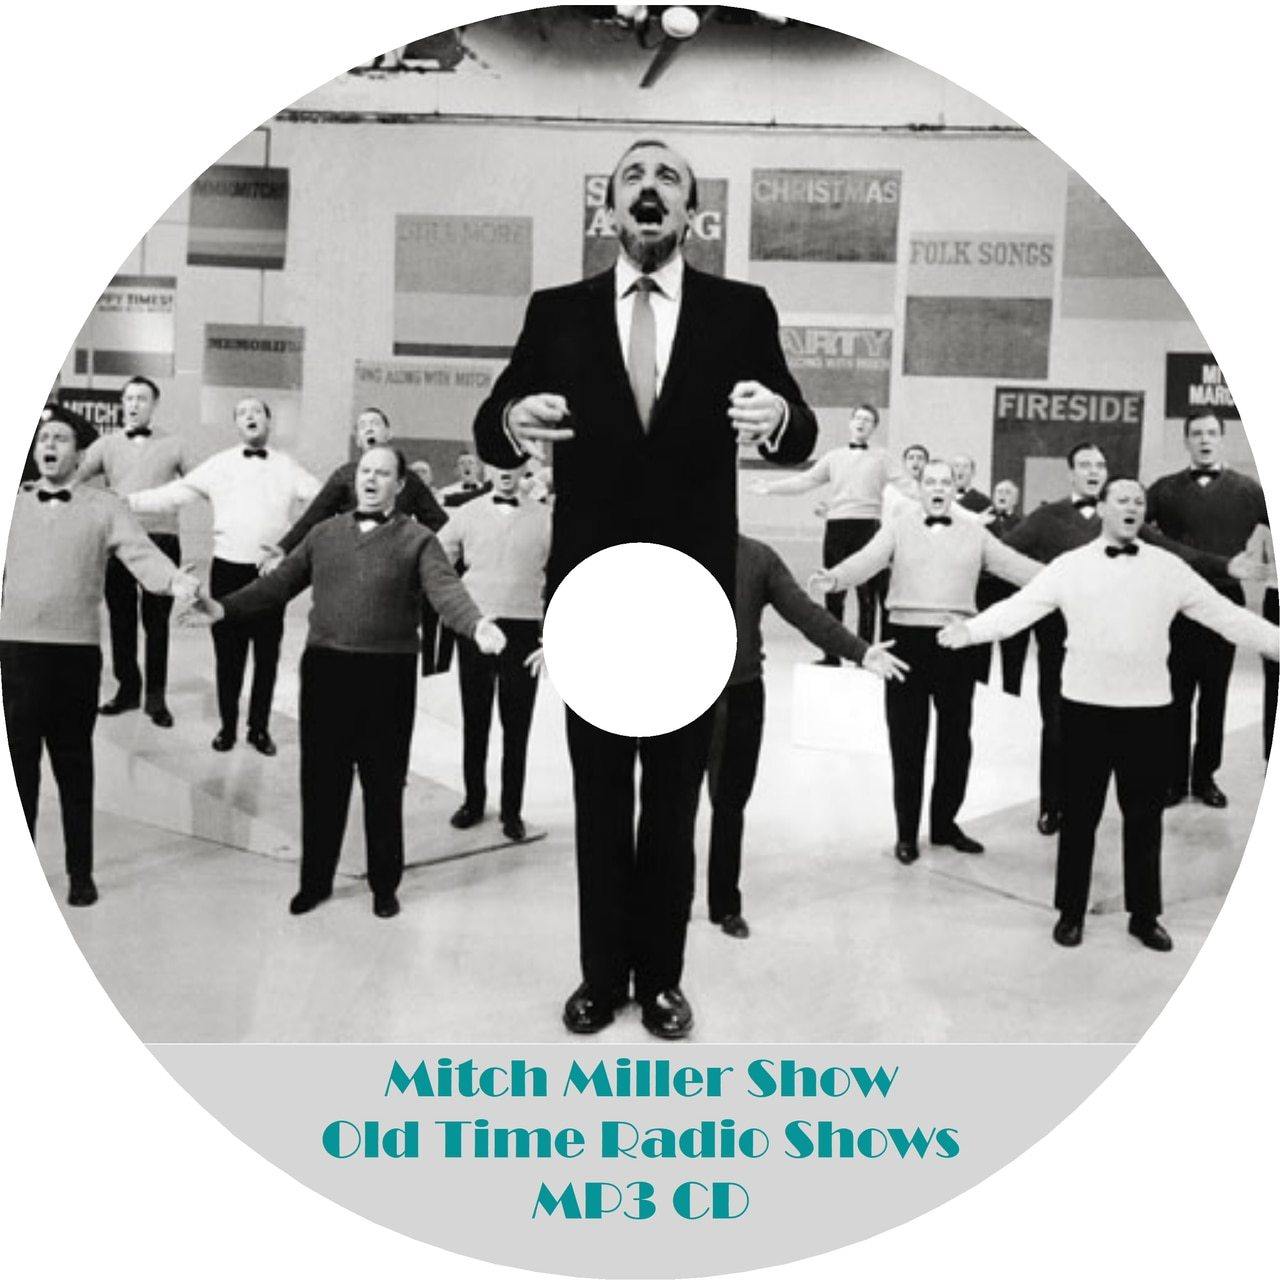 Mitch Miller Show Old Time Radio Shows 2 Episodes On MP3 CD - OTR World